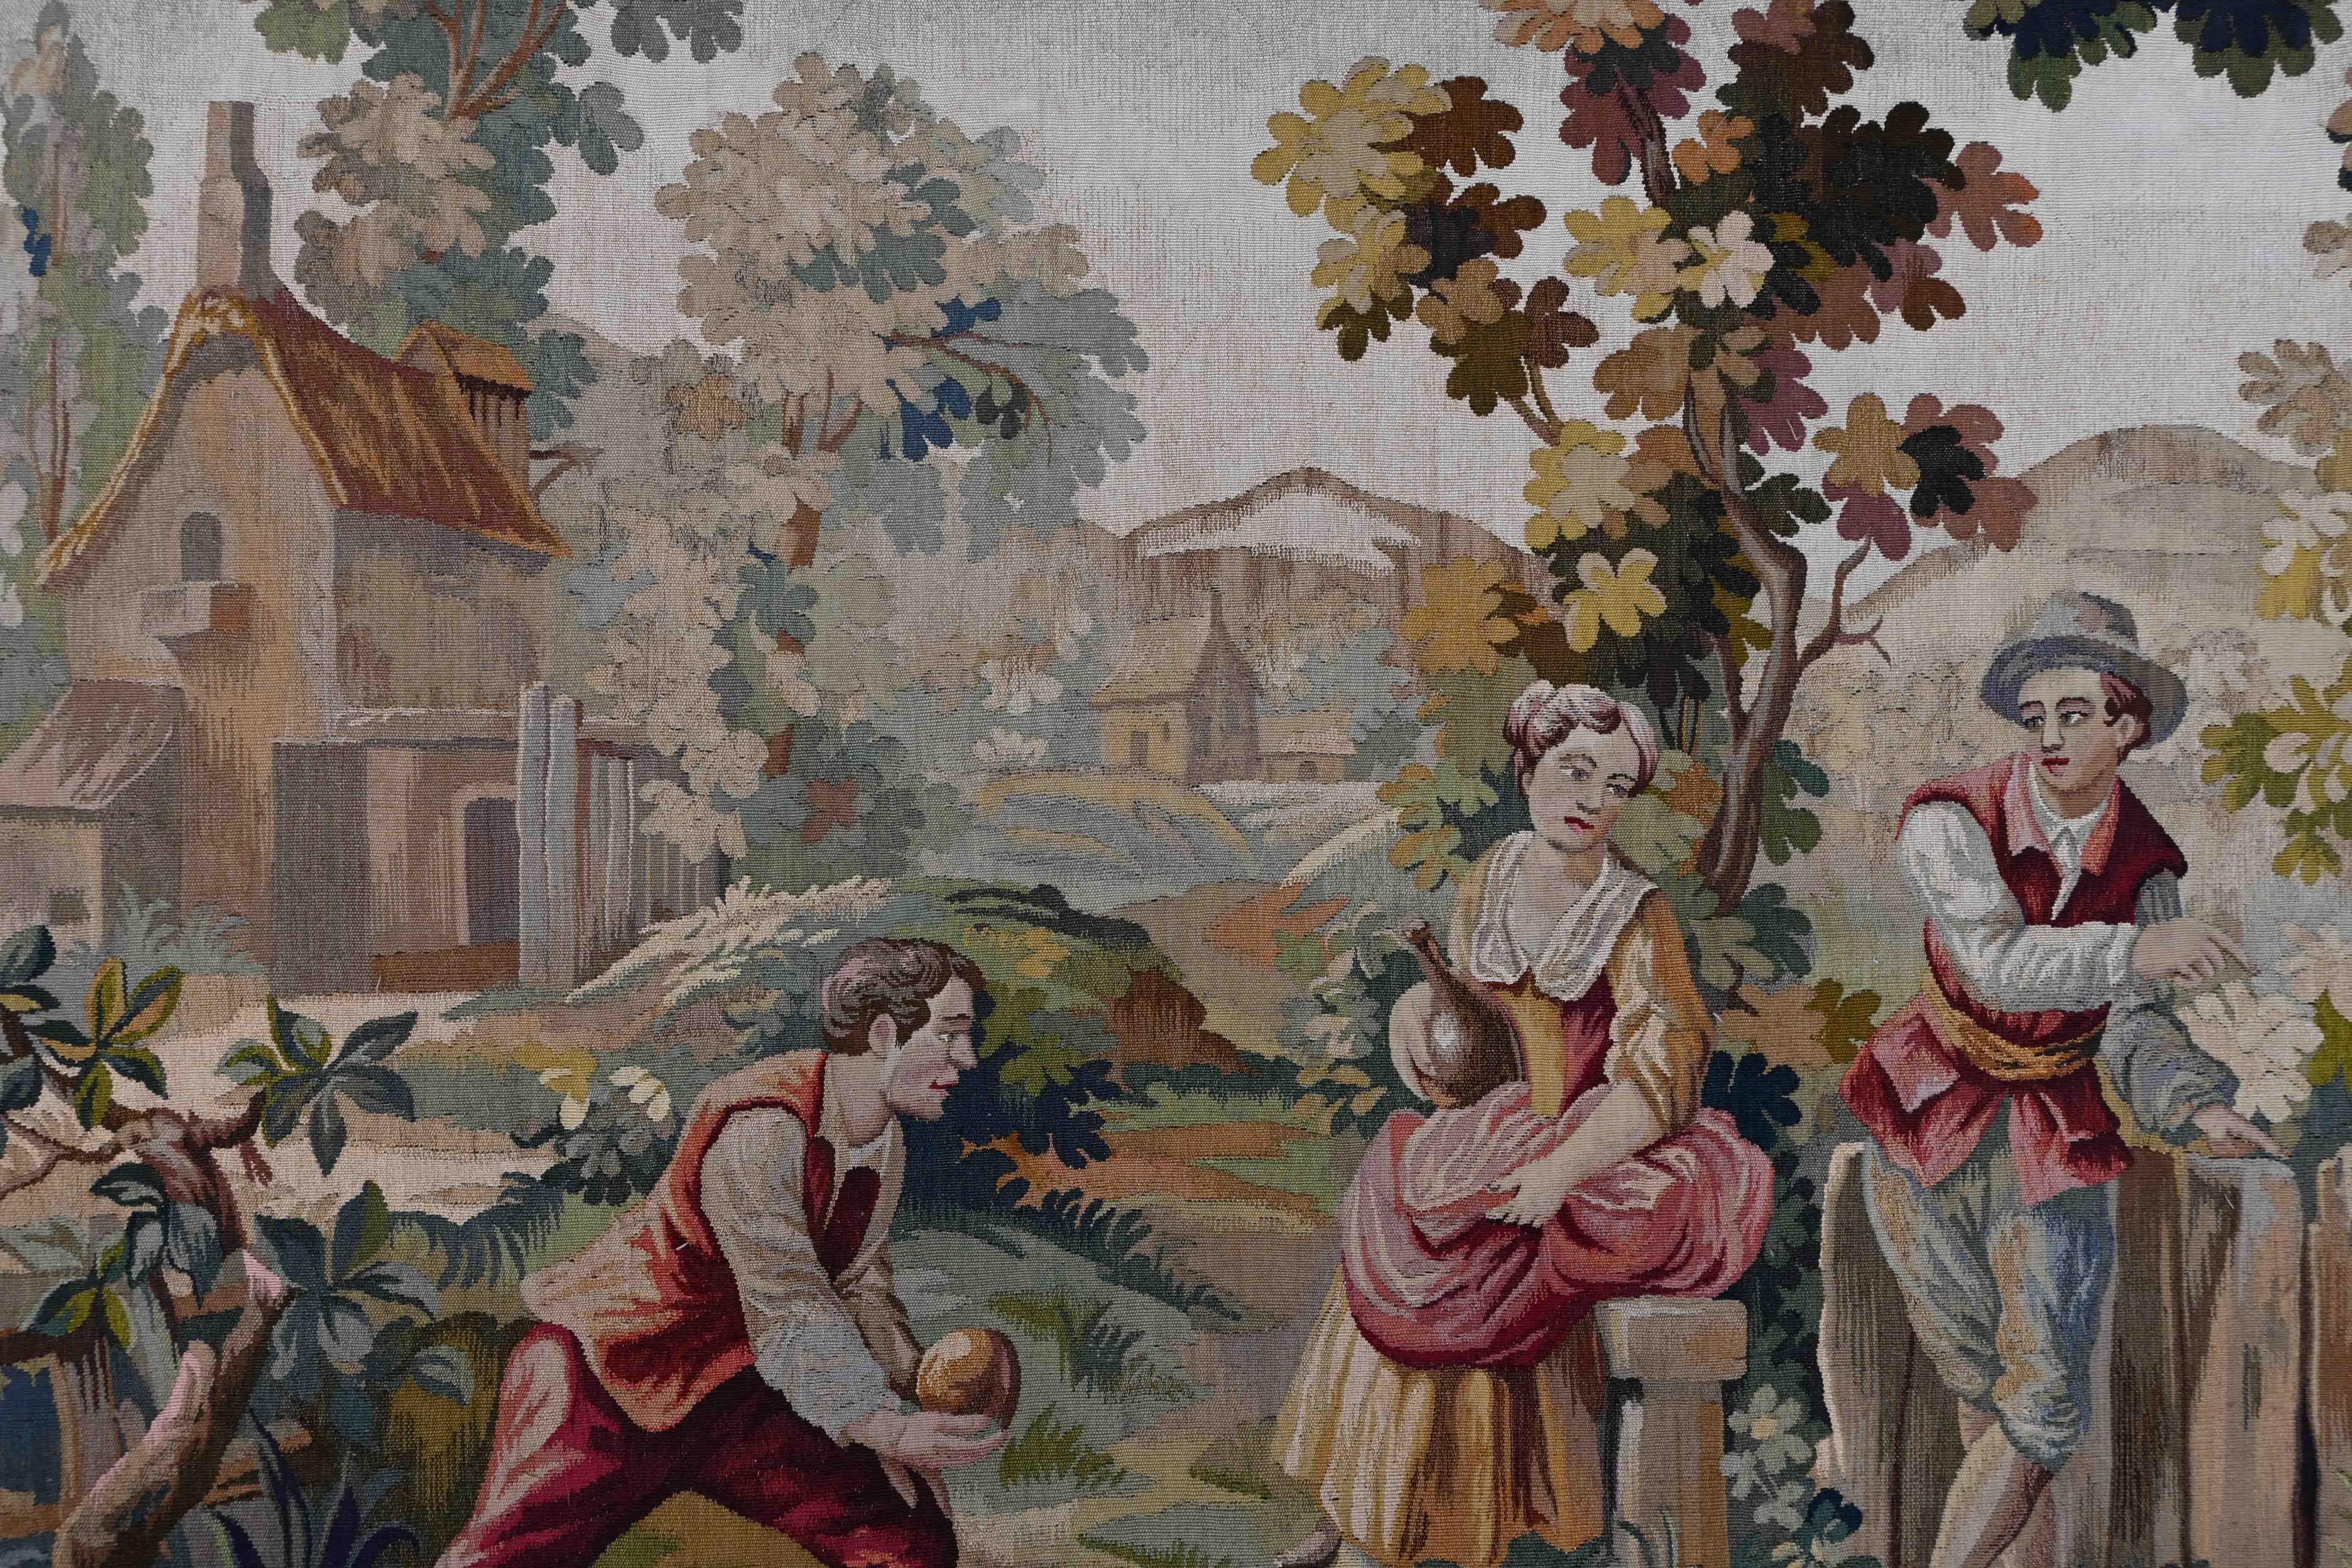 Aubusson tapestry 19th century petanque game scene - N° 1332 For Sale 2